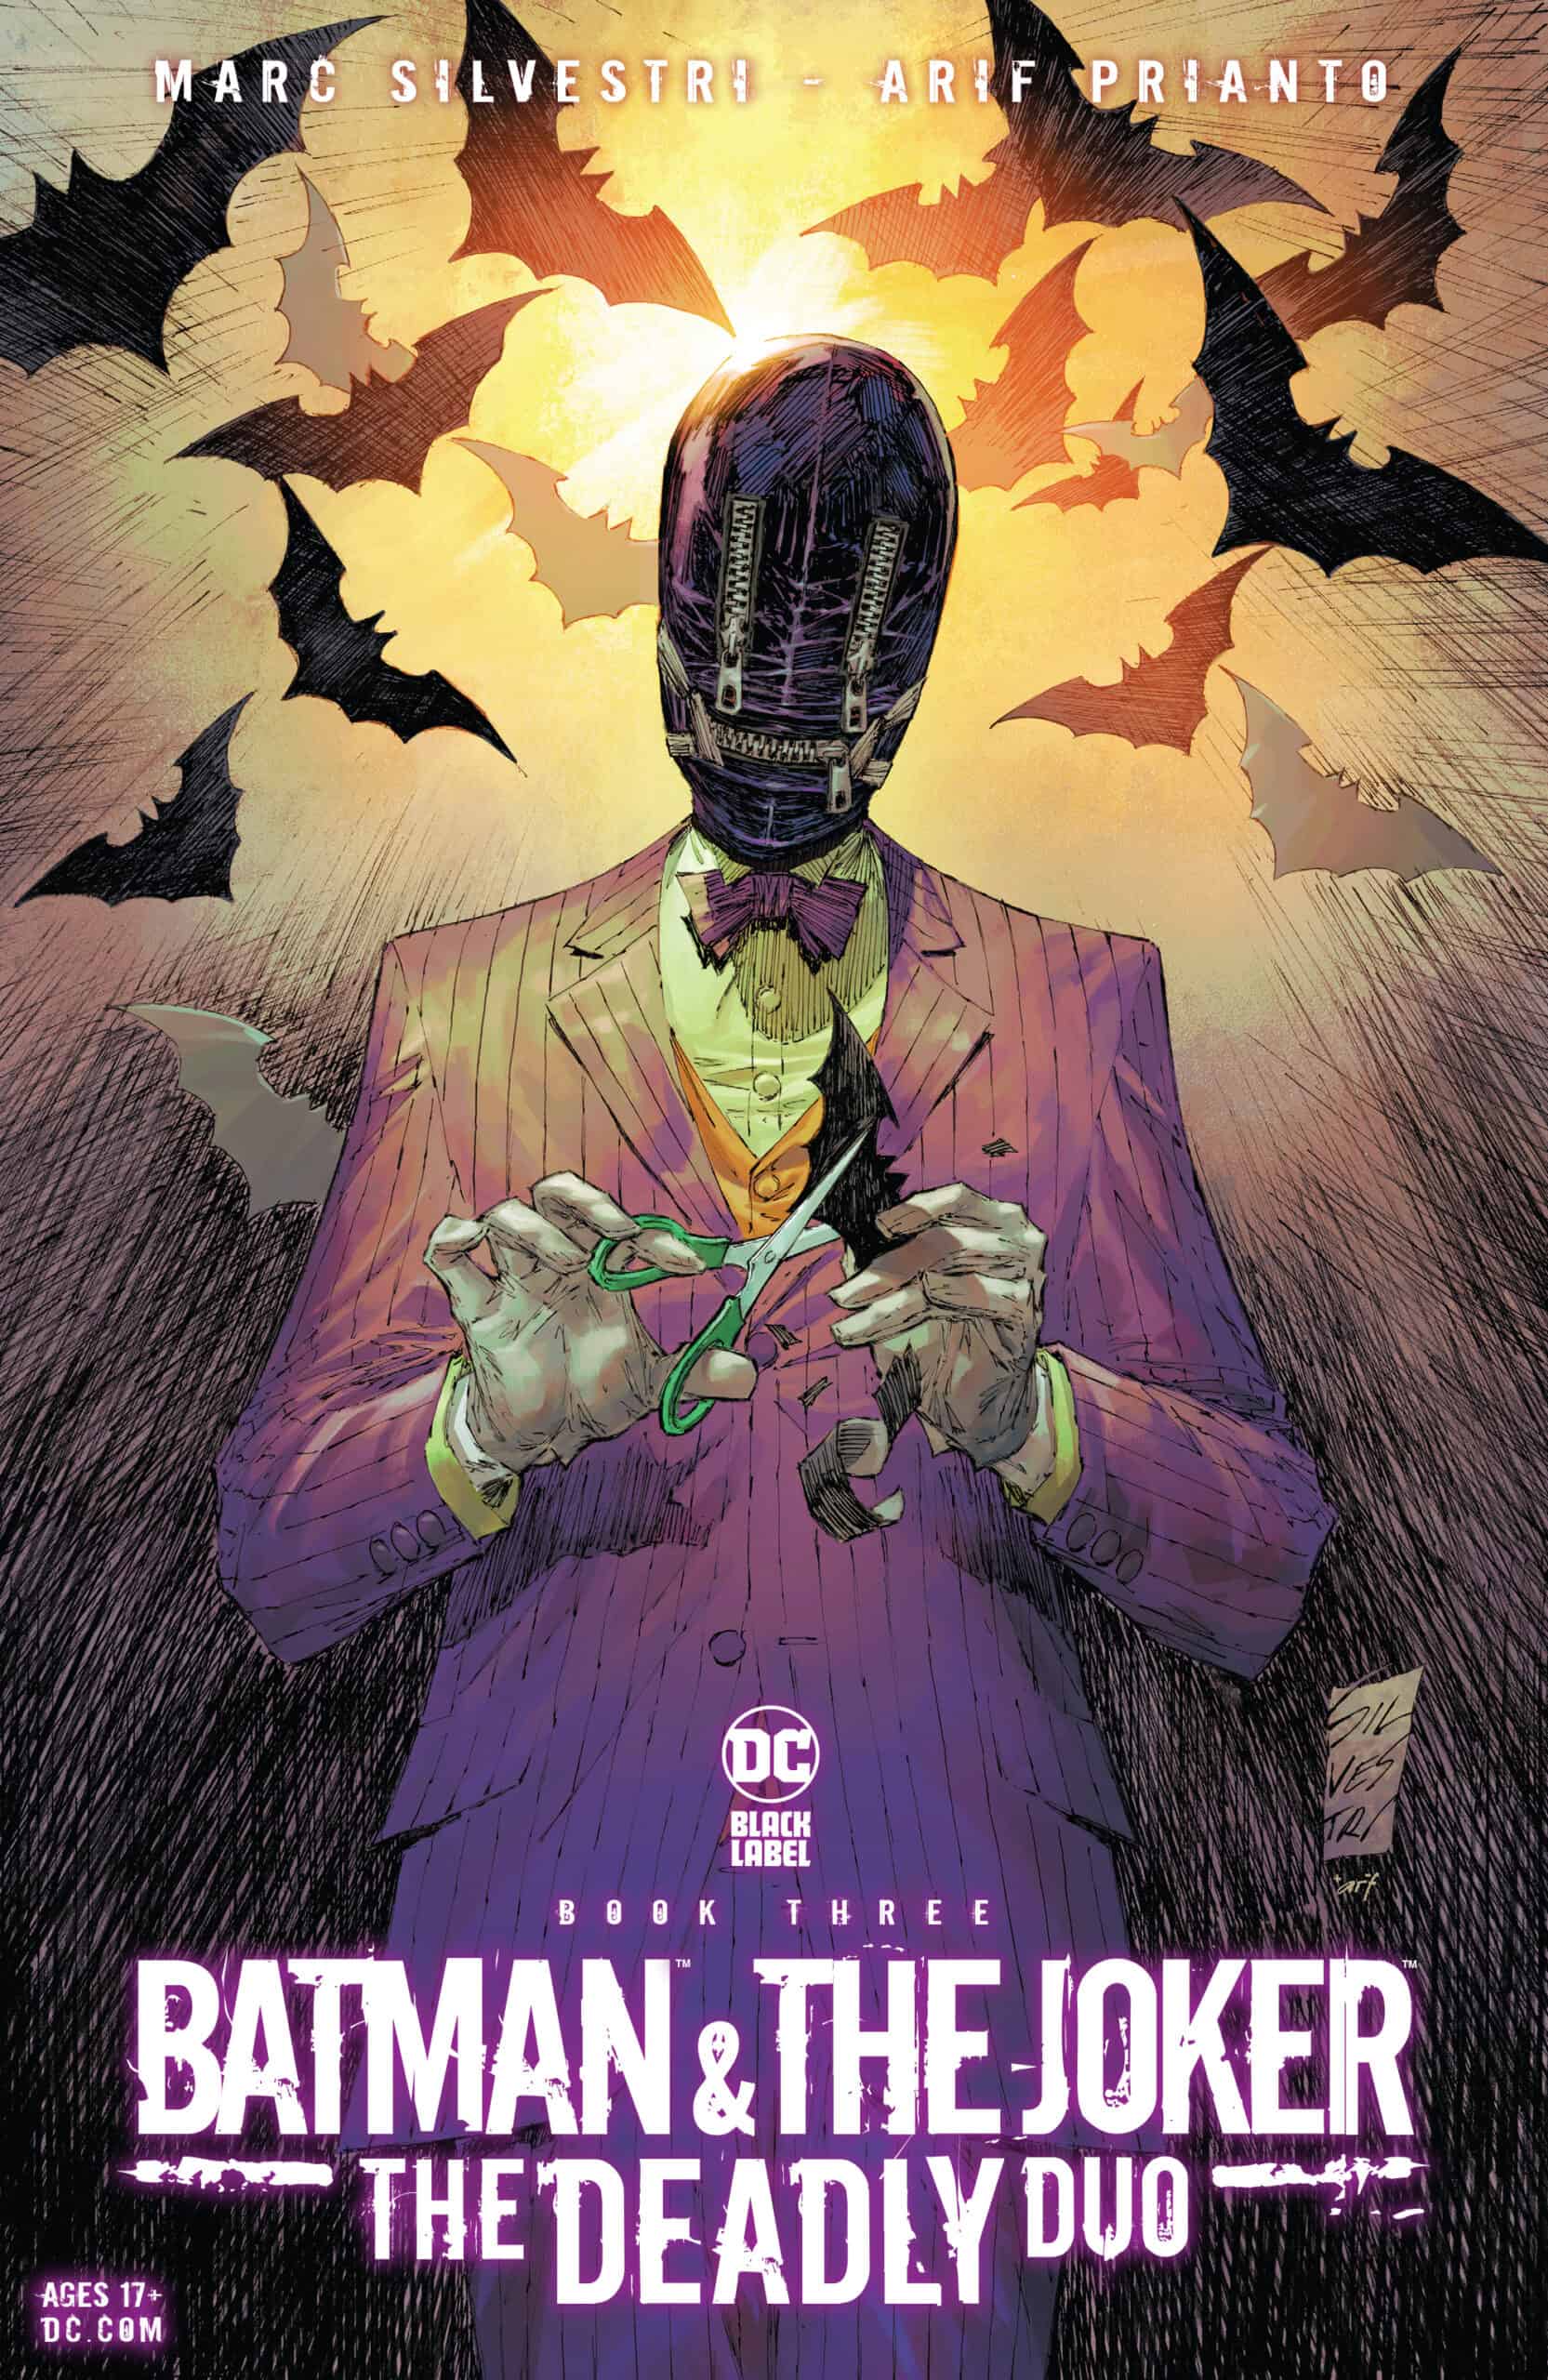 DC Comics Sneak Preview for January 10, 2023: The Unlikely Pairing  Continues in BATMAN & THE JOKER: THE DEADLY DUO #3 - Comic Watch